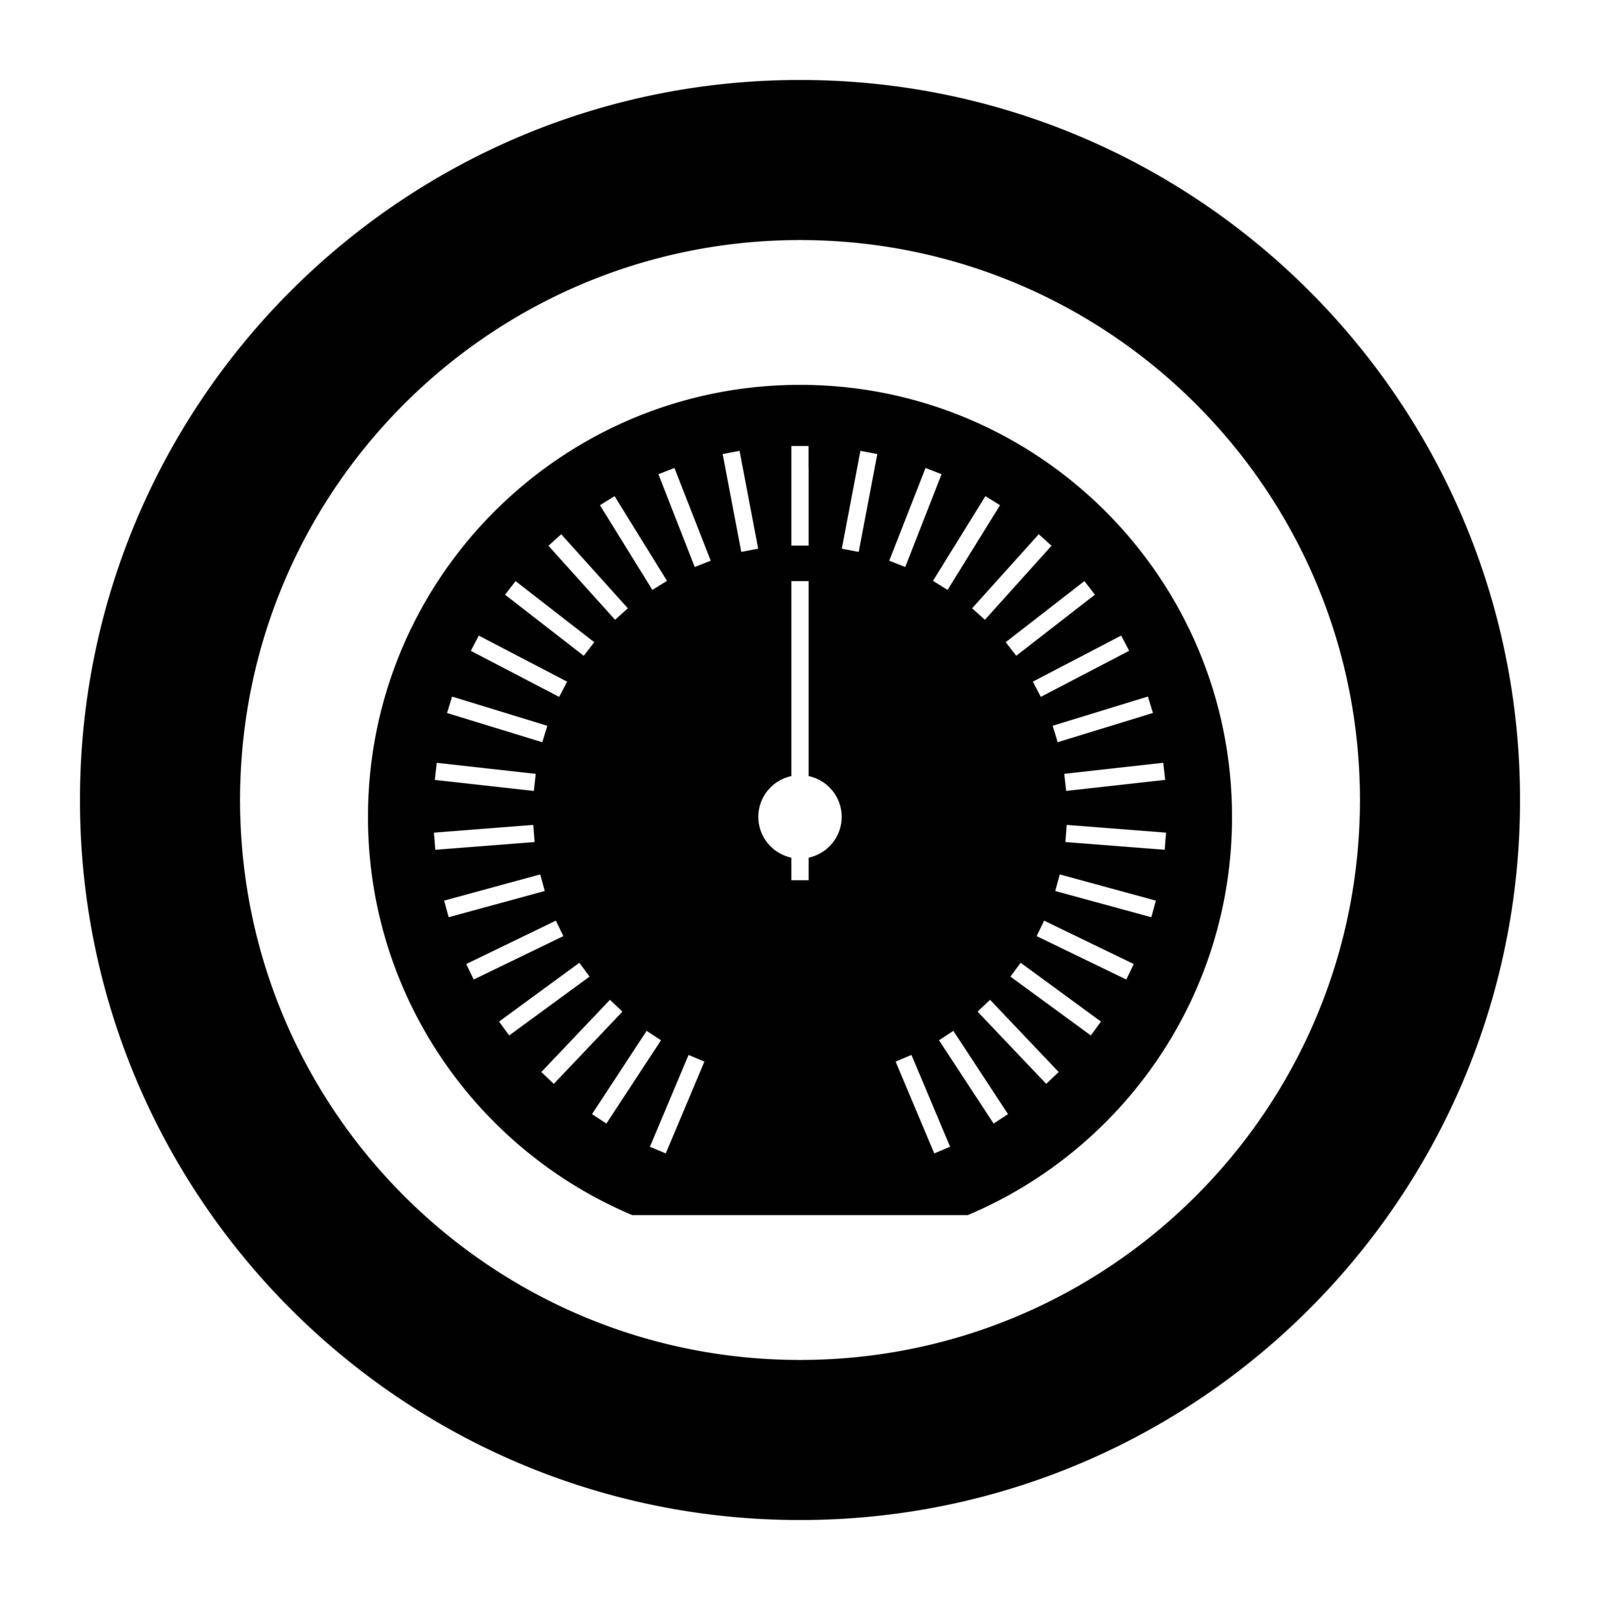 Speedometer odometer speed counter meter icon in circle round black color vector illustration image solid outline style simple